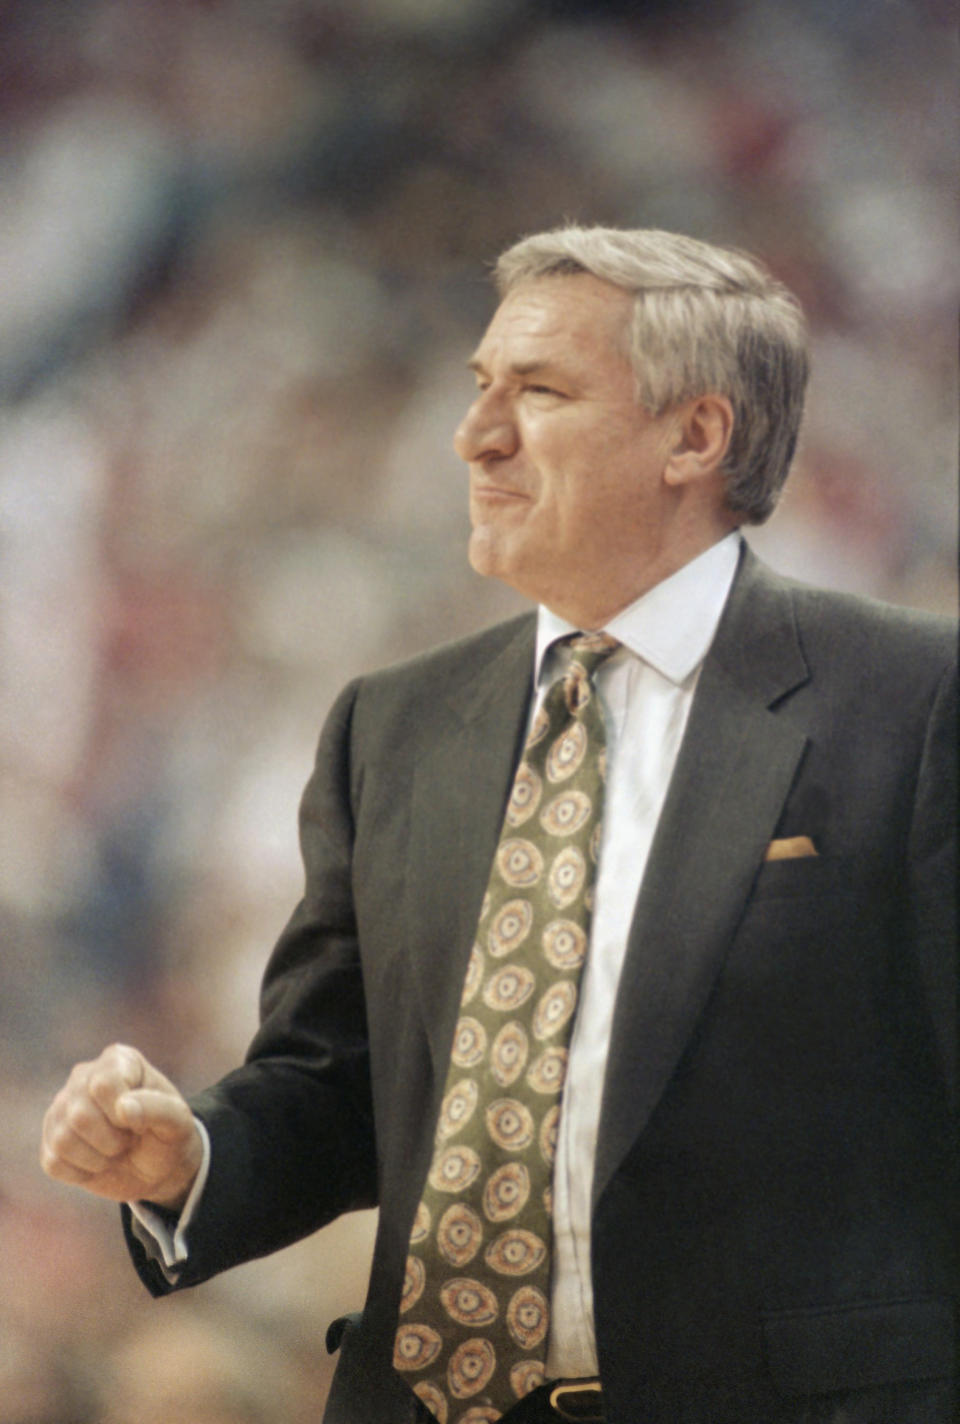 North Carolina coach Dean Smith calls out a play from the sidelines during his team’s NCAA Tournament first-round game against Miami, Ohio. North Carolina won, 68-63, to give Smith his record 48th NCAA Tournament win in Cincinnati, March 20, 1992. AP Photo/Al Behrman